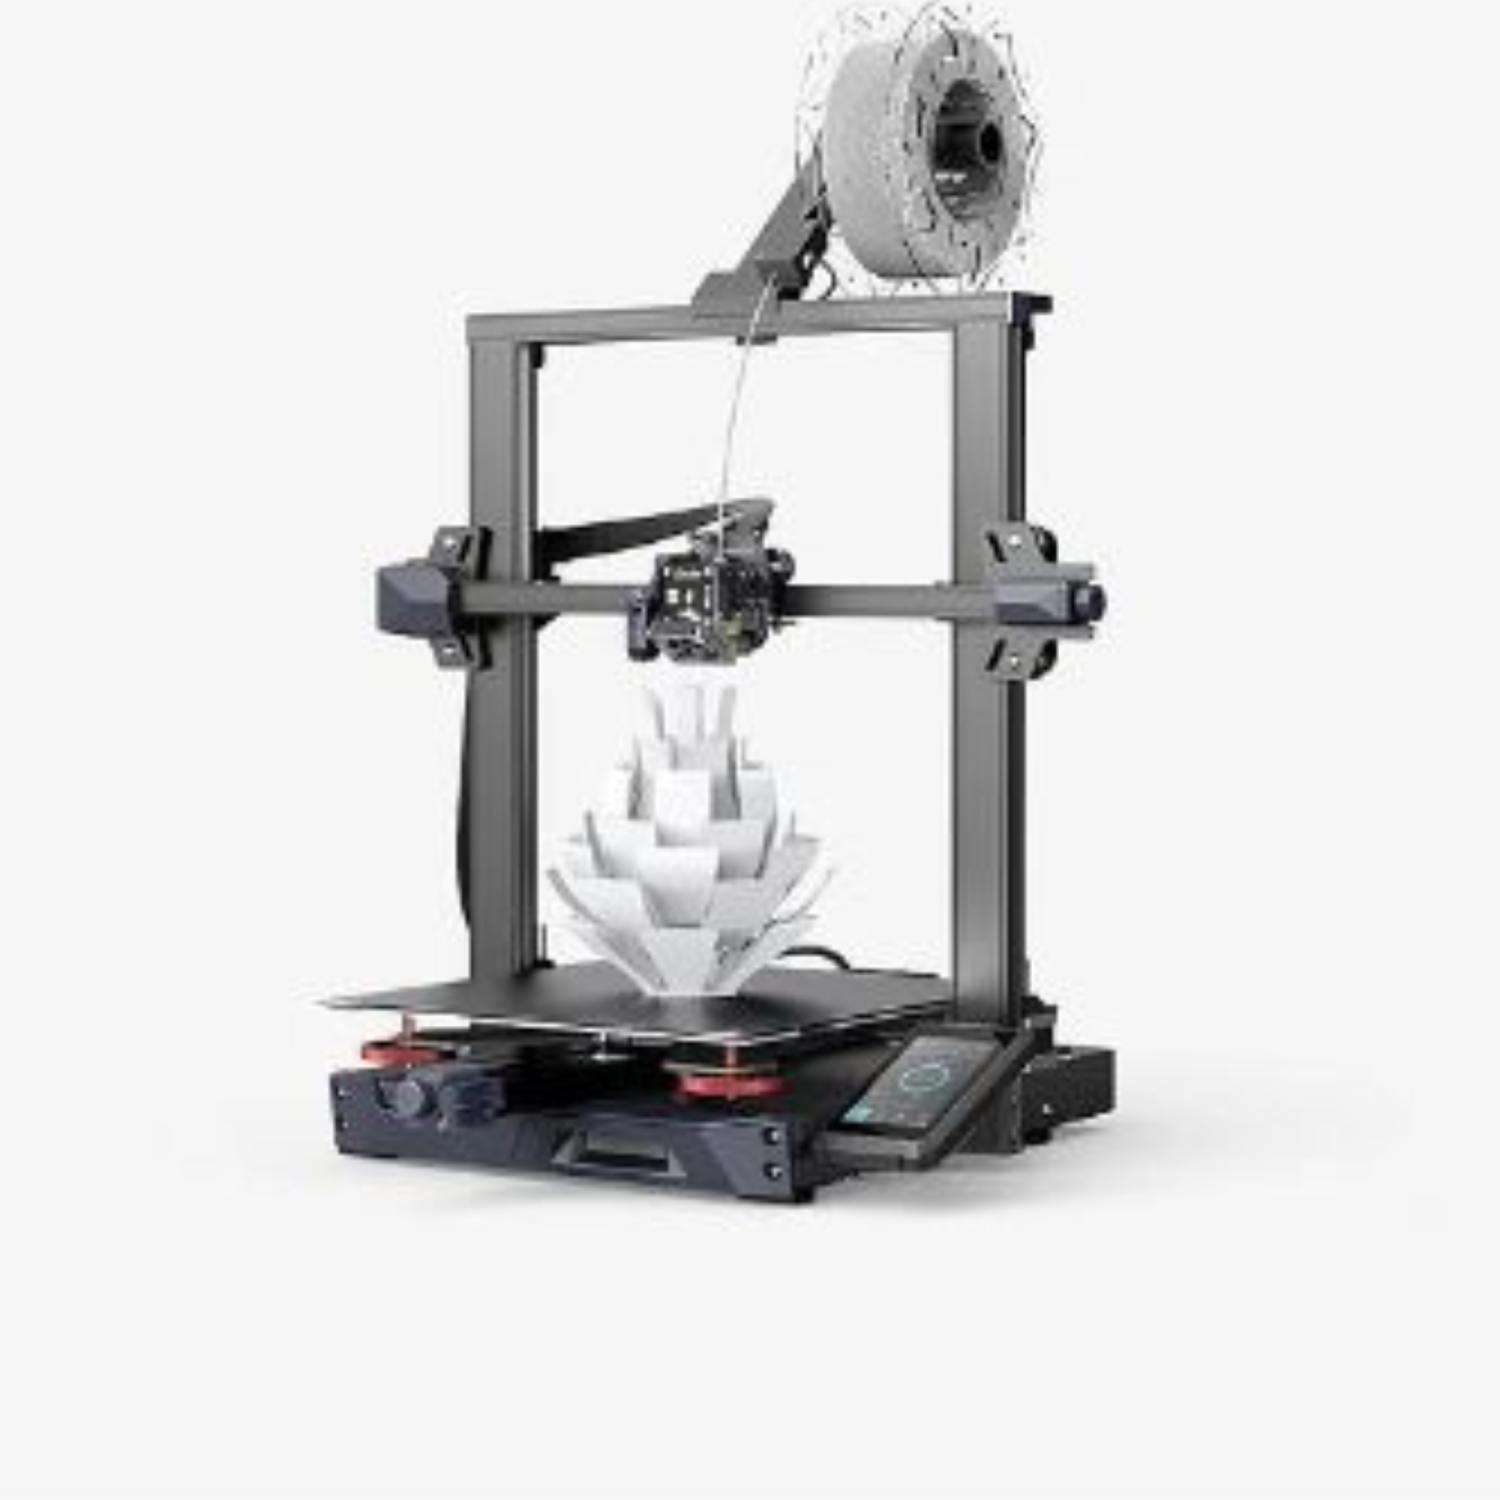 Creality Ender-3 S1 Plus Large 3D Printer with Filament Material, Silent Motherboard & 4.3 inch Touchscreen